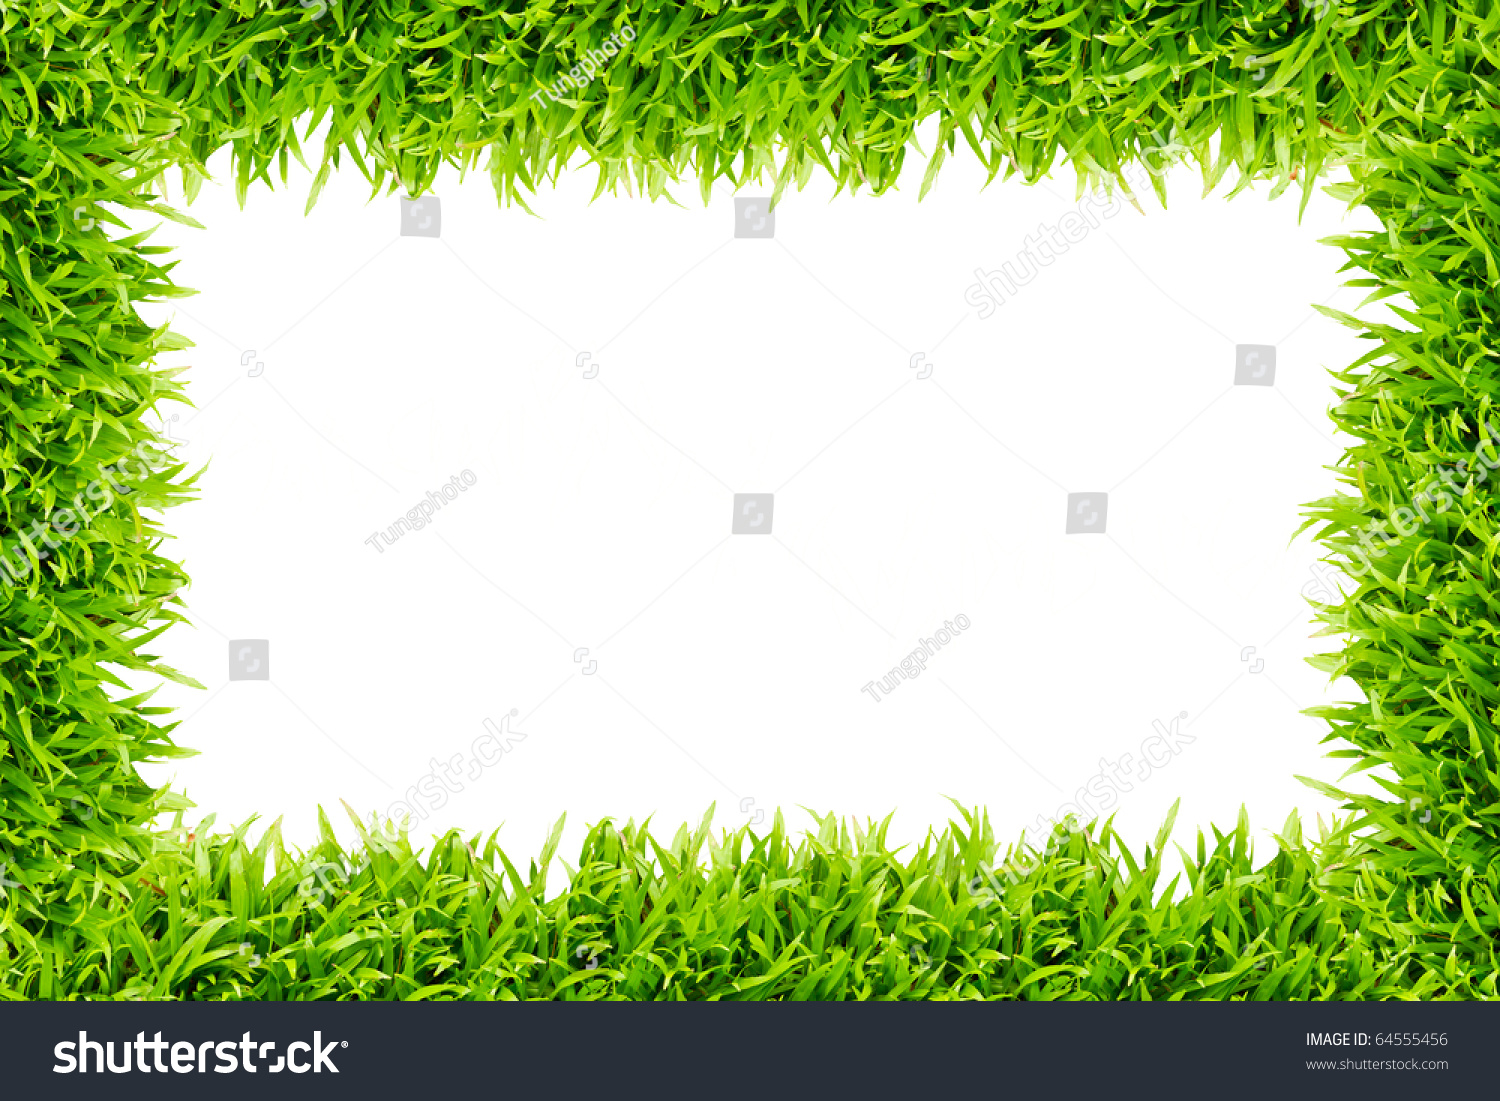 Grass Frame On White Background - You Can Add Any Word ...